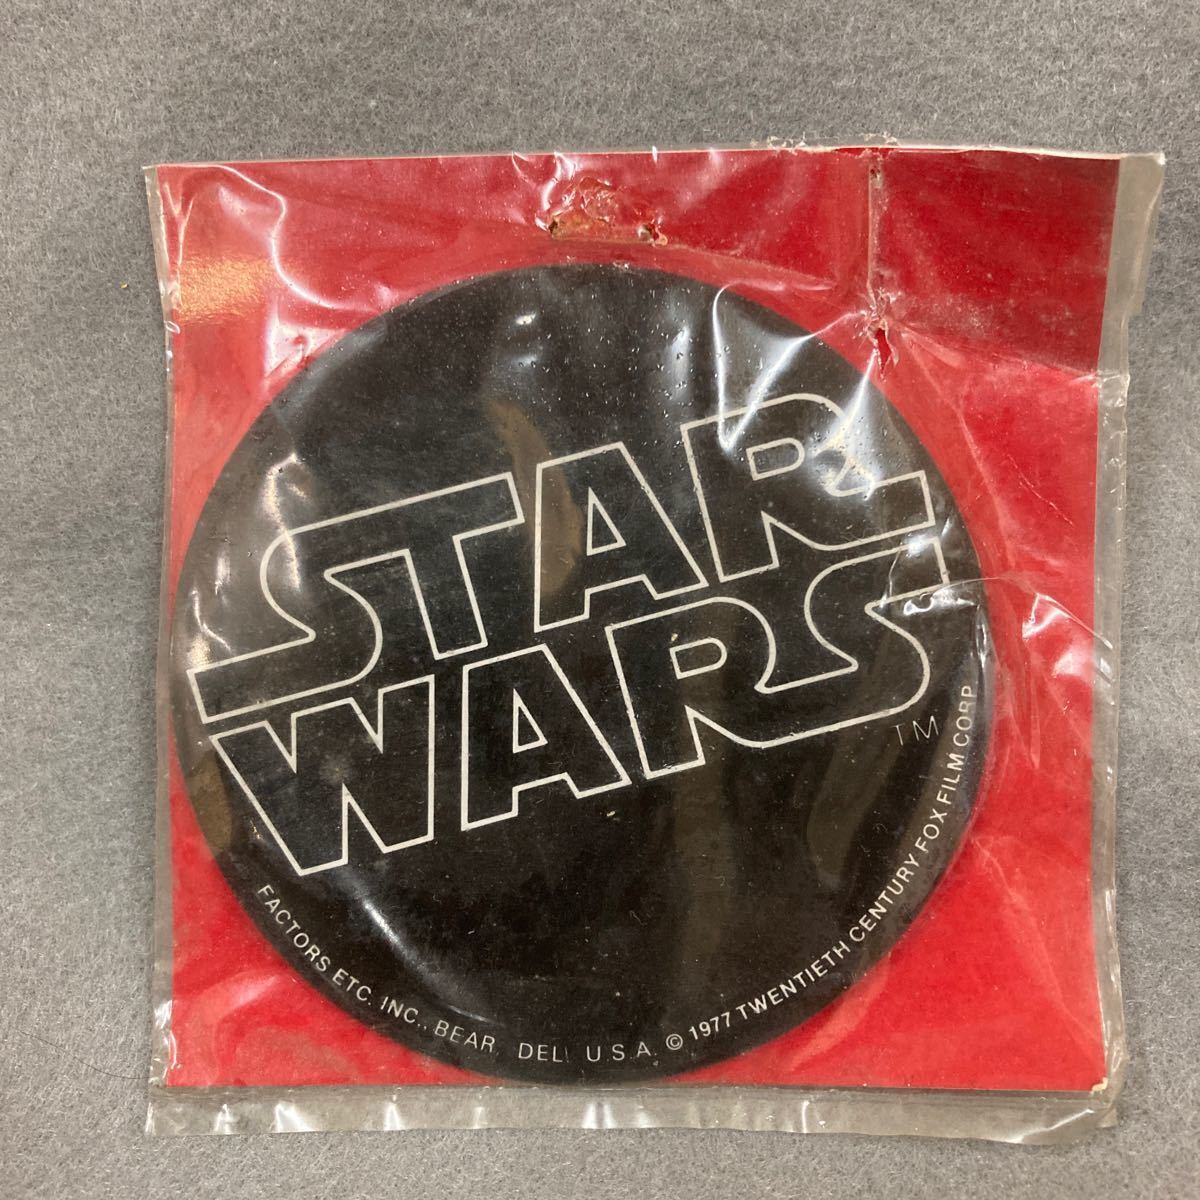 Showa Retro Star Wars Batch 1977 At That Time Material Is Plastic Board Dead Sto